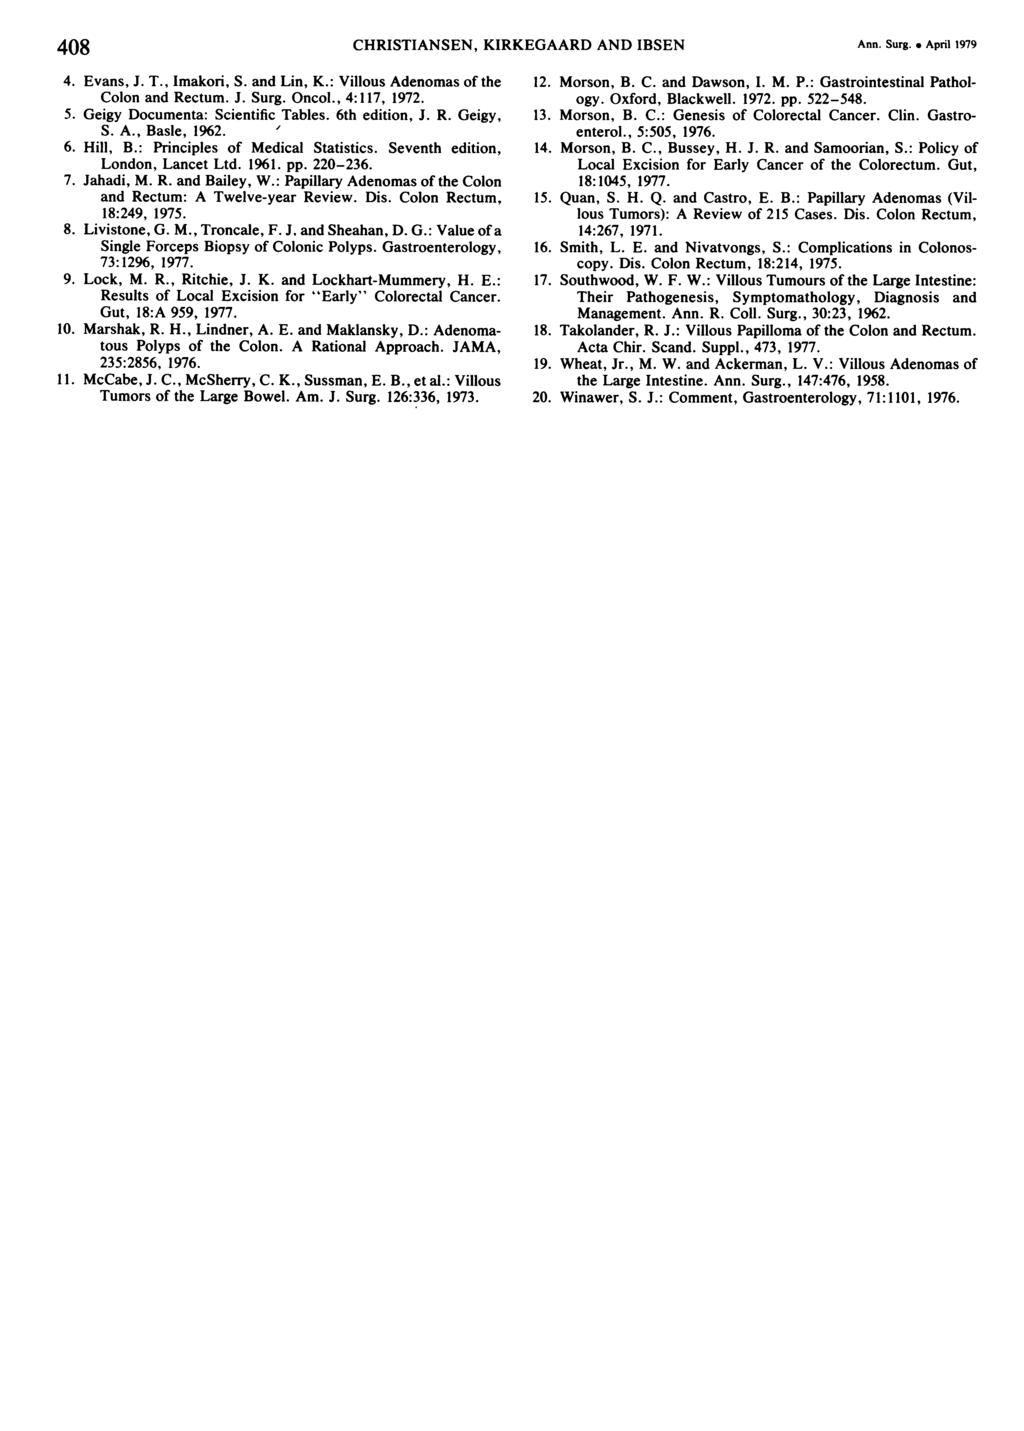 408 CHRISTIANSEN, KIFRKIEGAARD AND IBSEN Ann. Surg. * April 1979 4. Evans, J. T., Imakori, S. and Lin, K.: Villous Adenomas of the Colon and Rectum. J. Surg. Oncol., 4:117, 1972. 5.